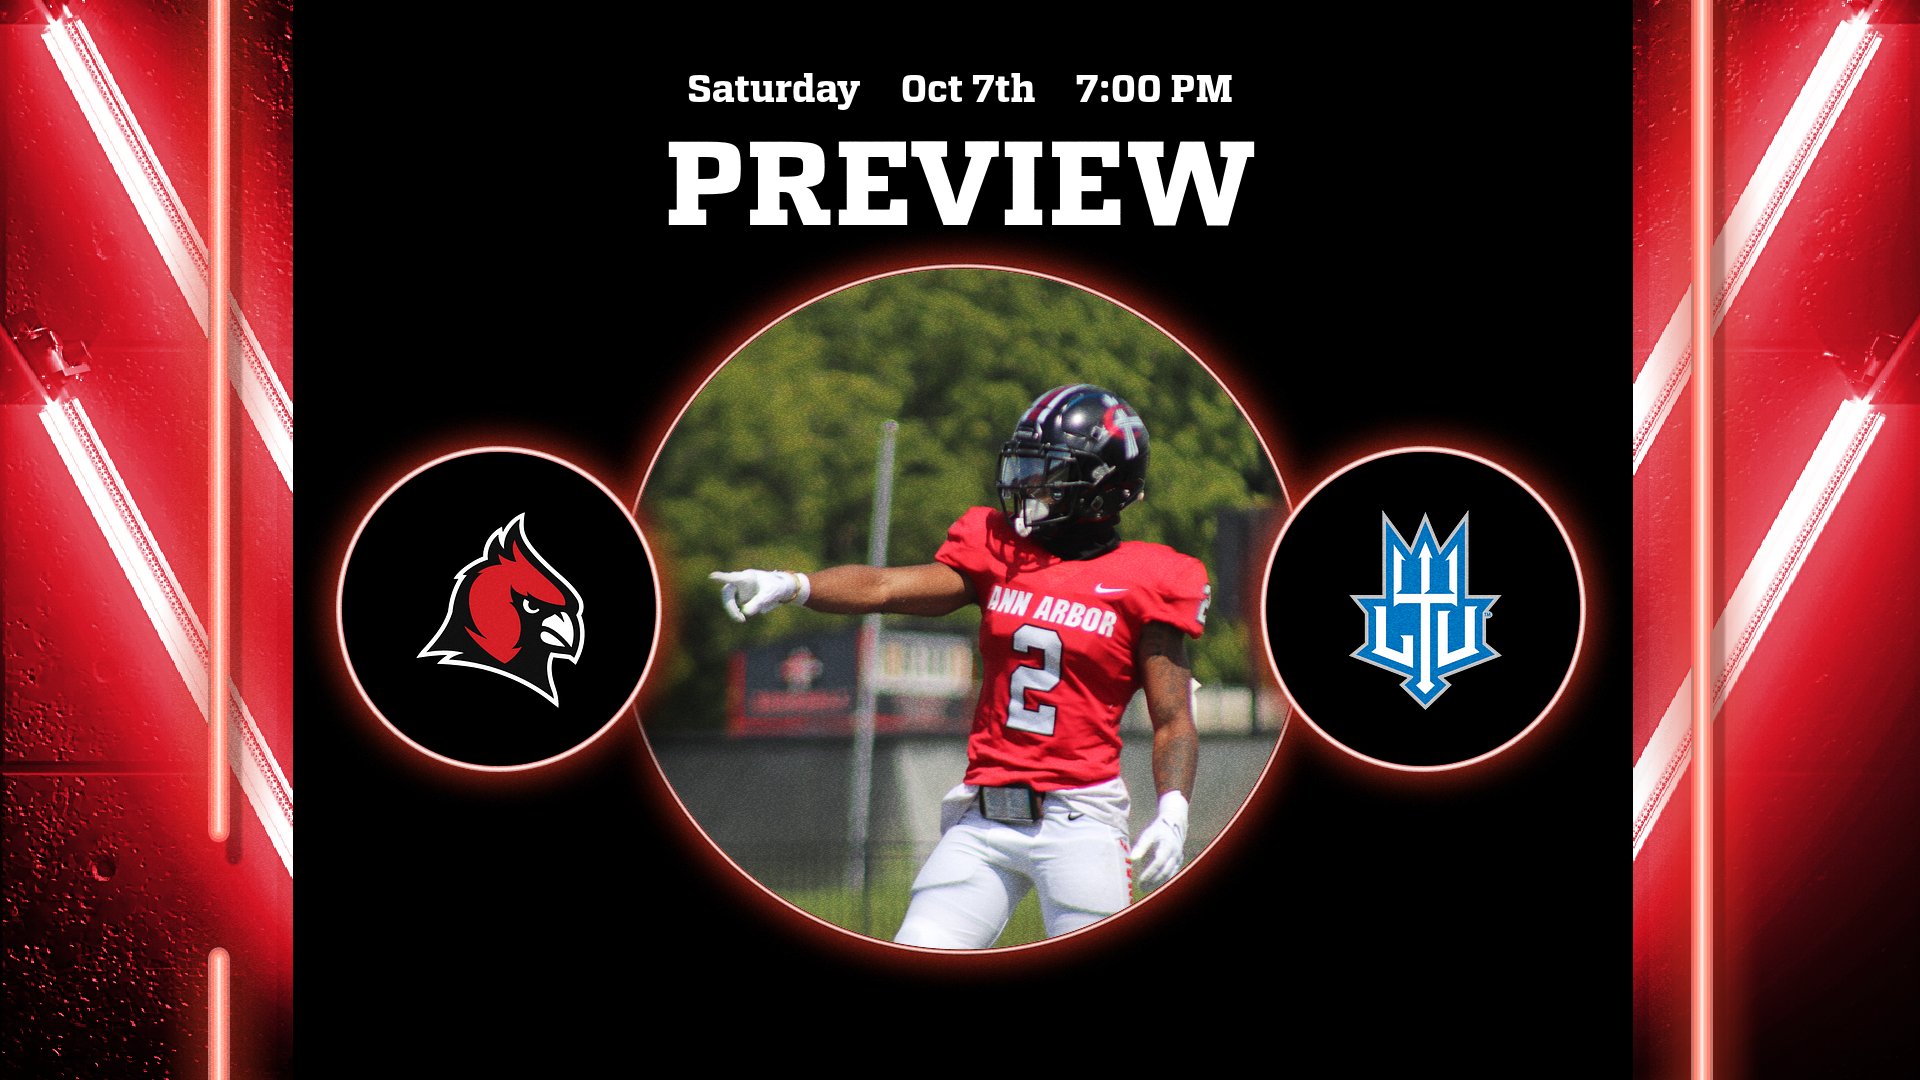 WEEK 5 GAME NOTES: FOOTBALL RETURNS TO DIVISION PLAY AGAINST LAWRENCE TECH